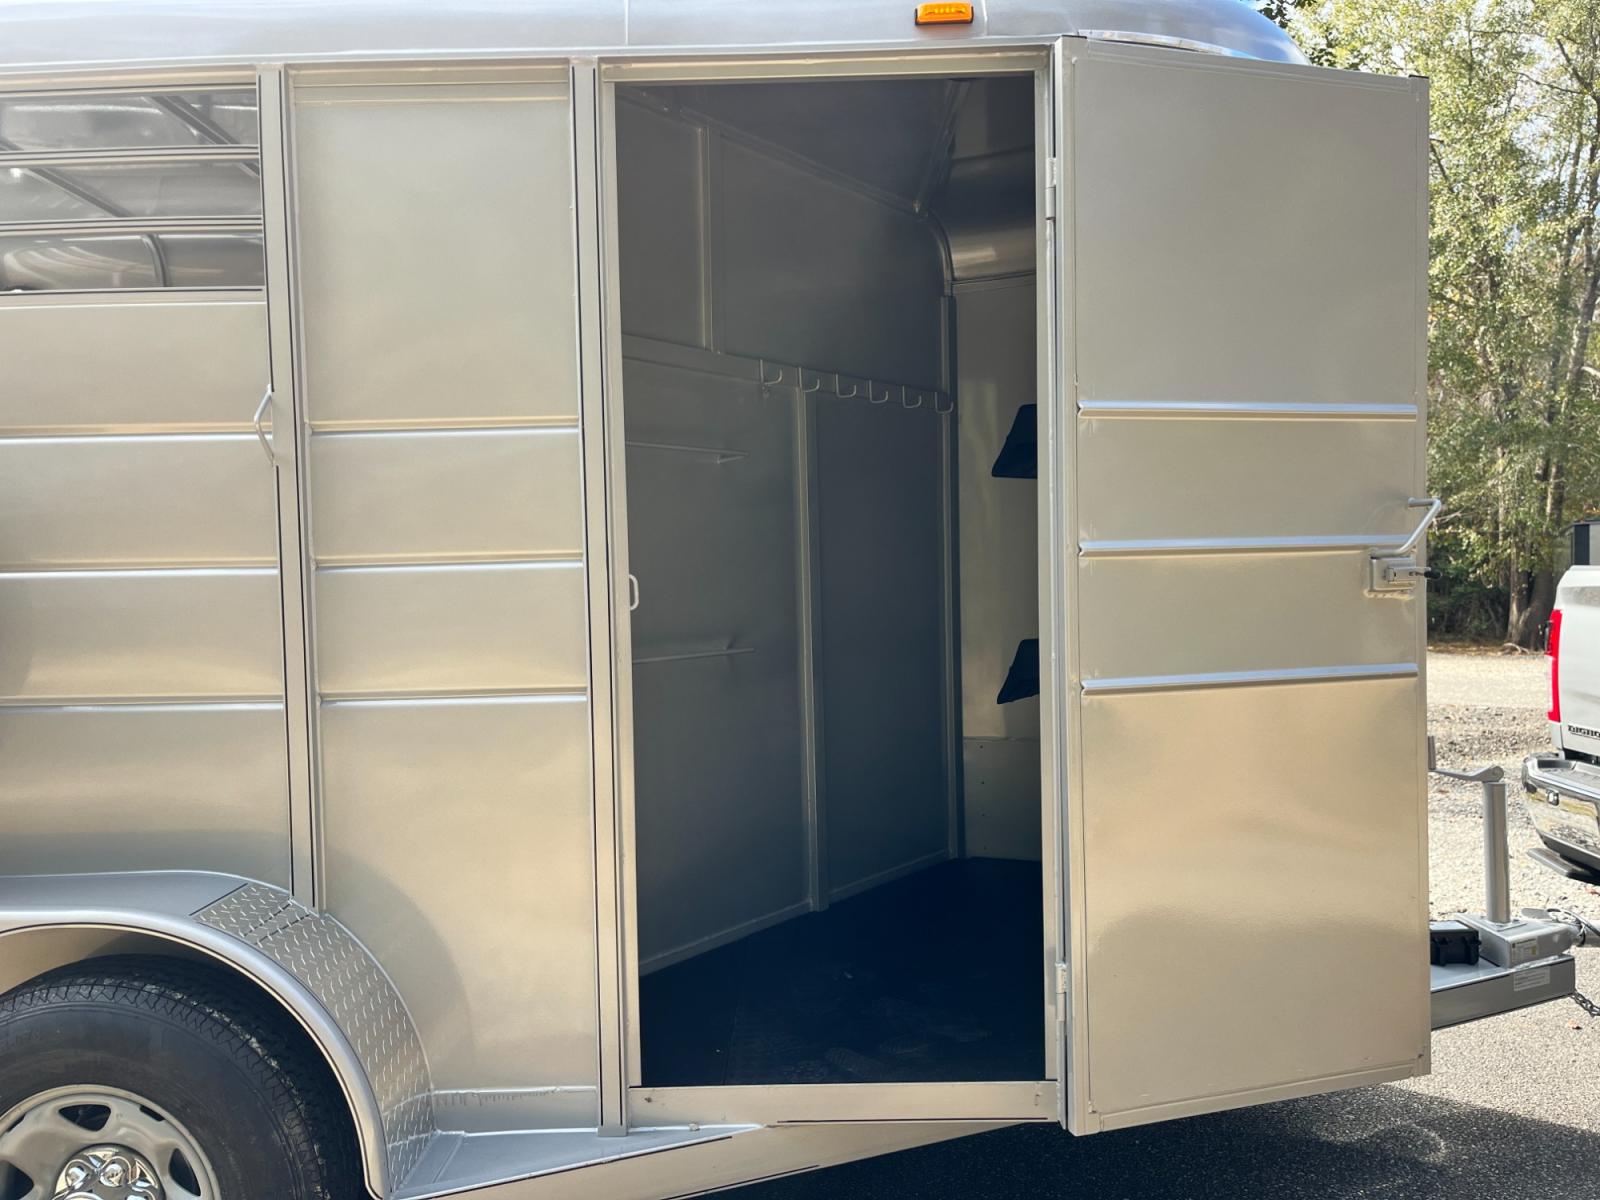 2023 Silver Metallic Calico 2 Horse Slant , located at 1330 Rainey Rd., Macon, 31220, (478) 960-1044, 32.845638, -83.778687 - Brand New 2023 Model 2 Horse Slant Calico Brand Trailer! 6ft Wide X 13ft Long Deluxe Model Tandem Axle Trailer! Easy Close Slant Divider Latch! 16